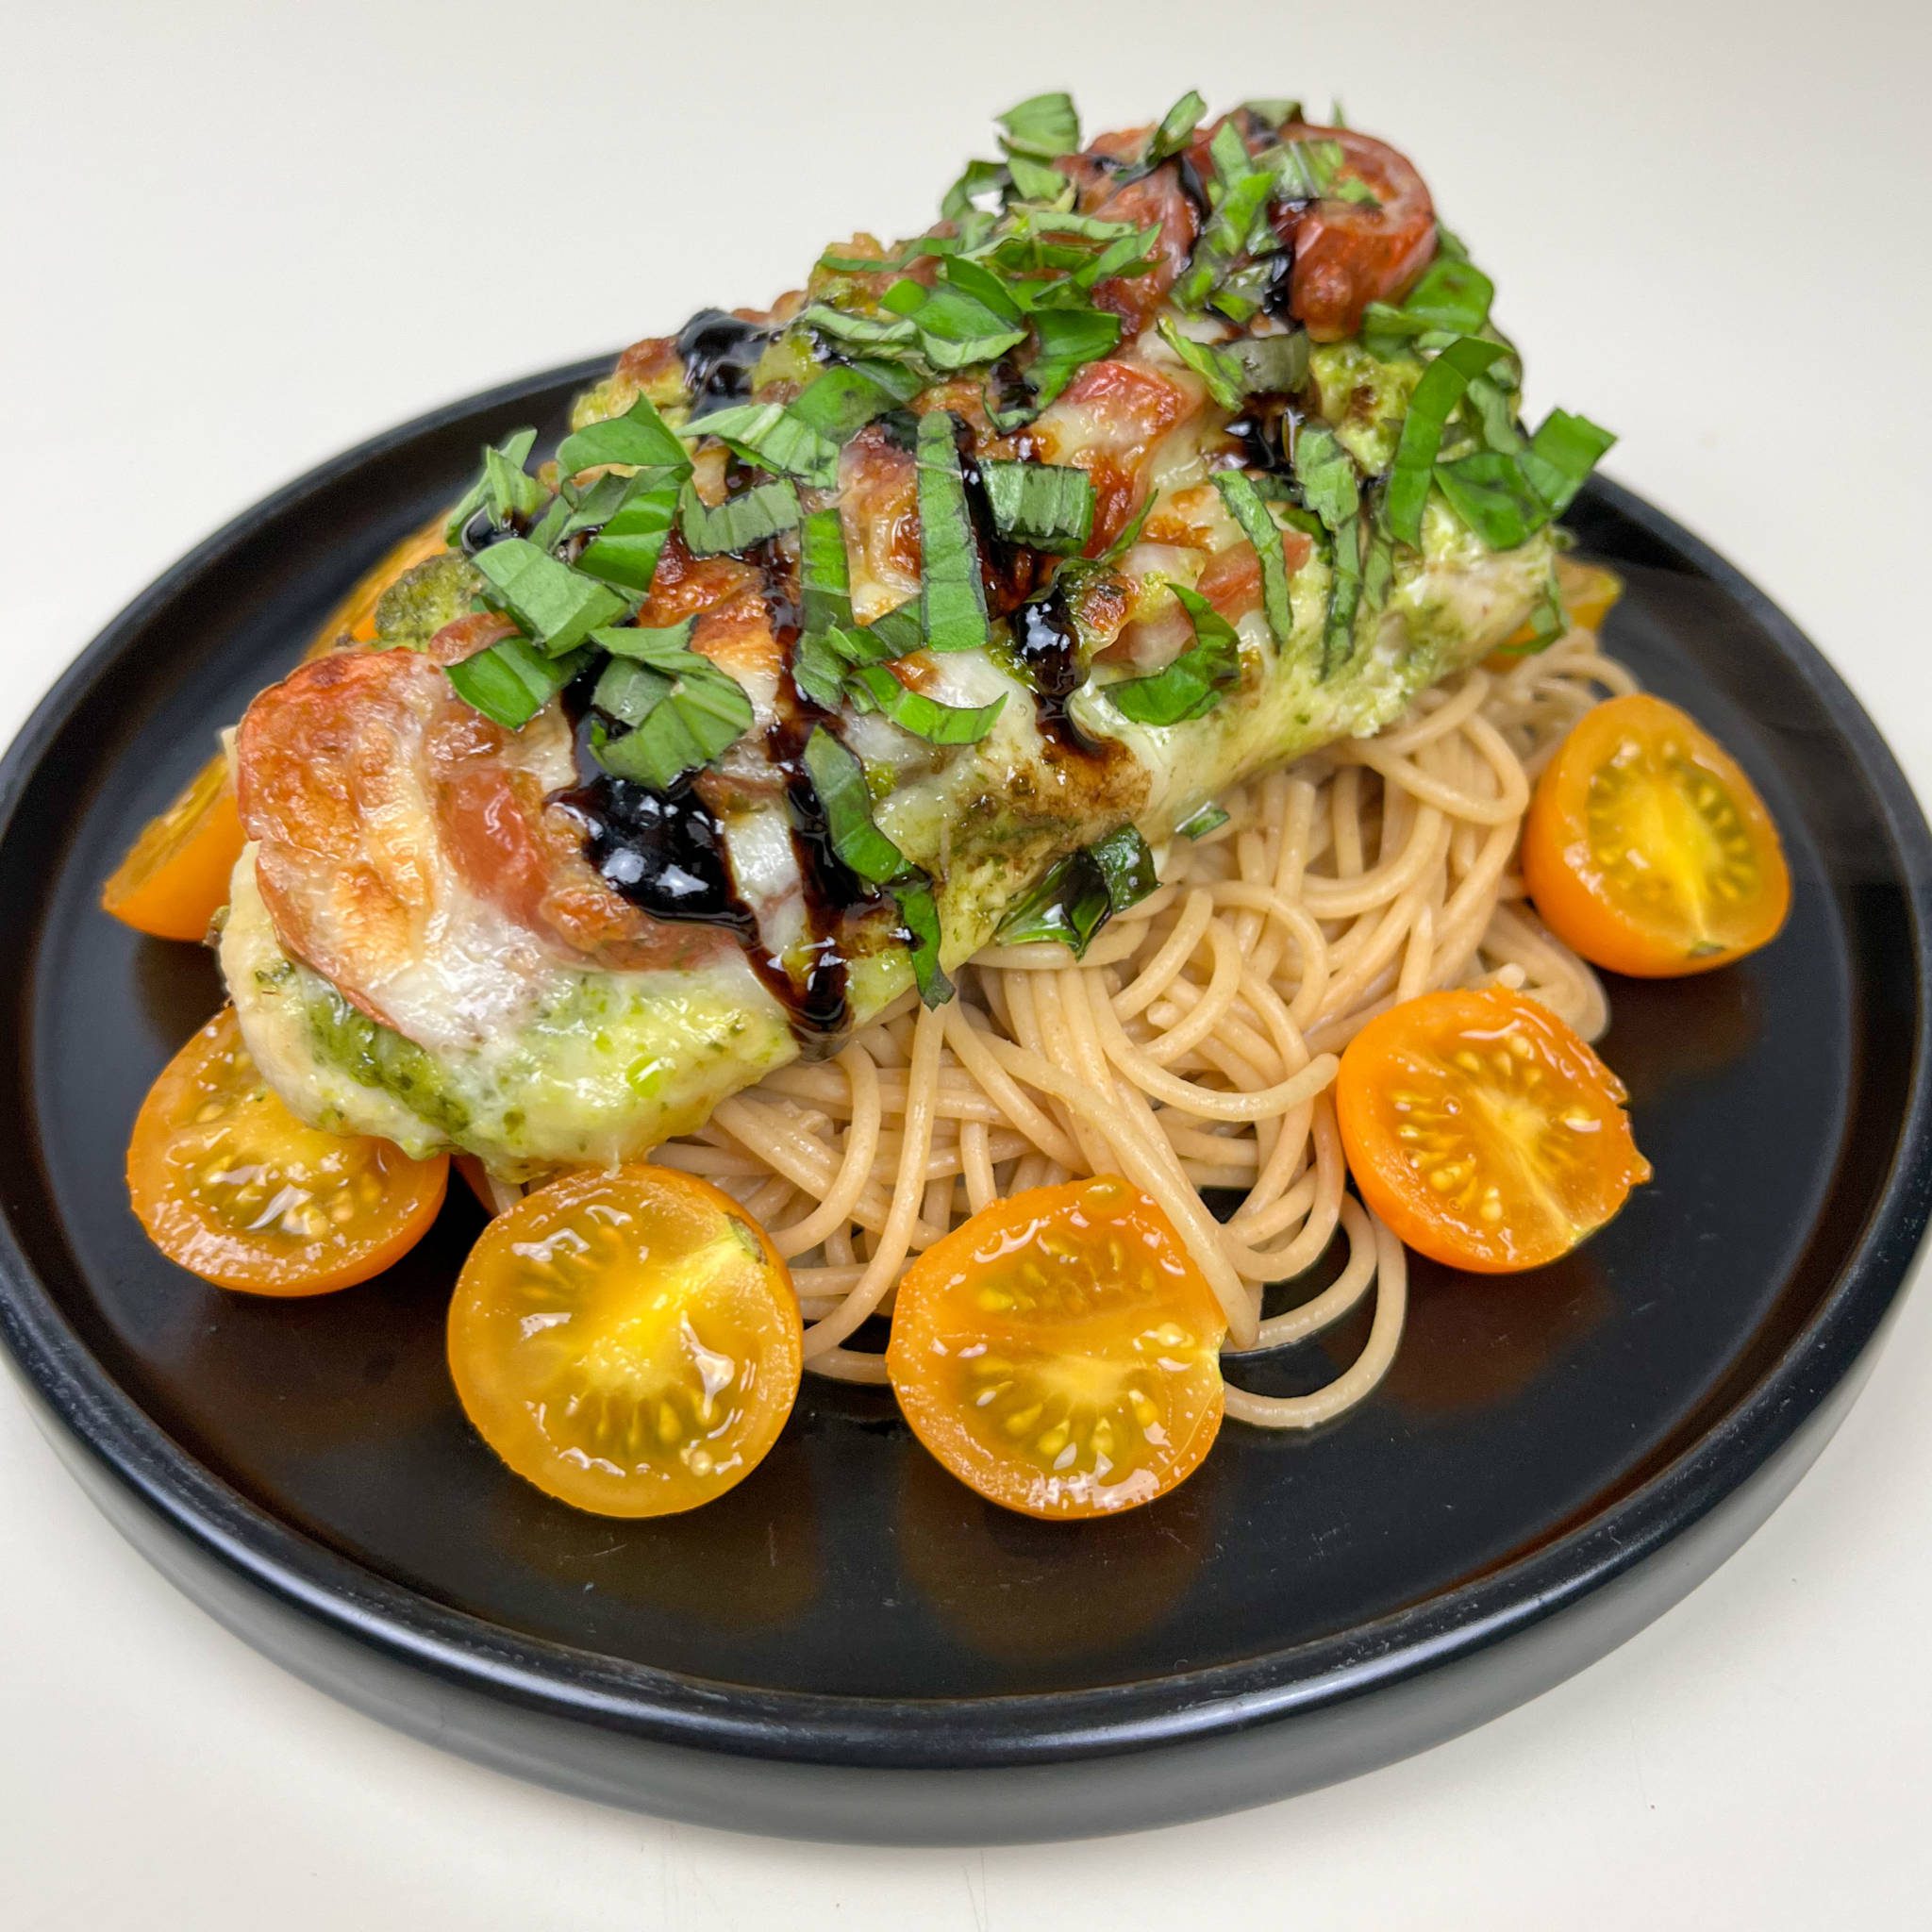 Pesto Caprese Chicken Garnished with Fresh Basil, Cherry Tomatoes, and Balsamic Glaze Served Over Buttered Whole Grain Spaghetti Noodles